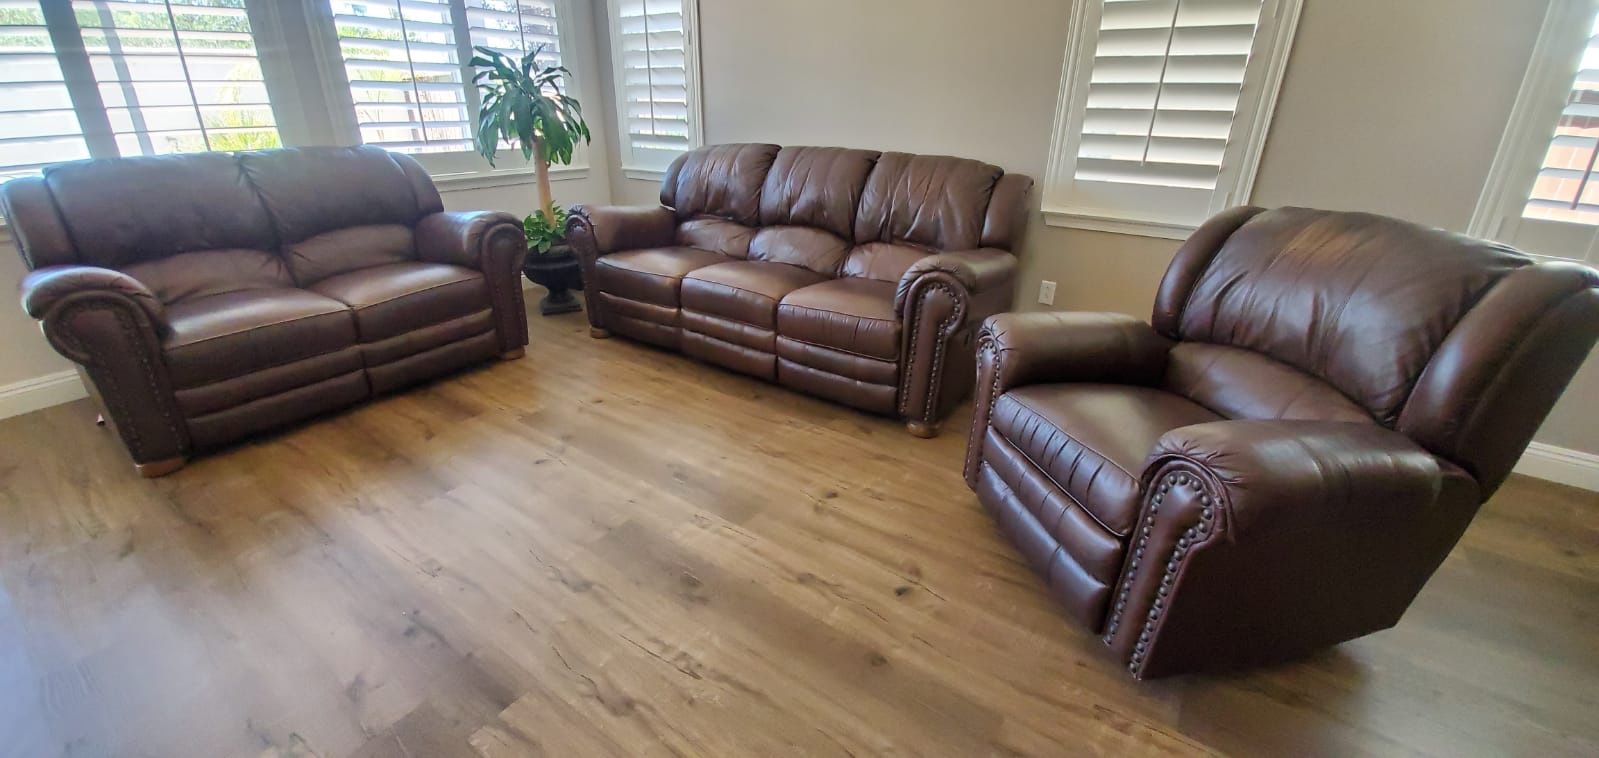 Selling living room set : 100% leather 3 piece 5 recliner